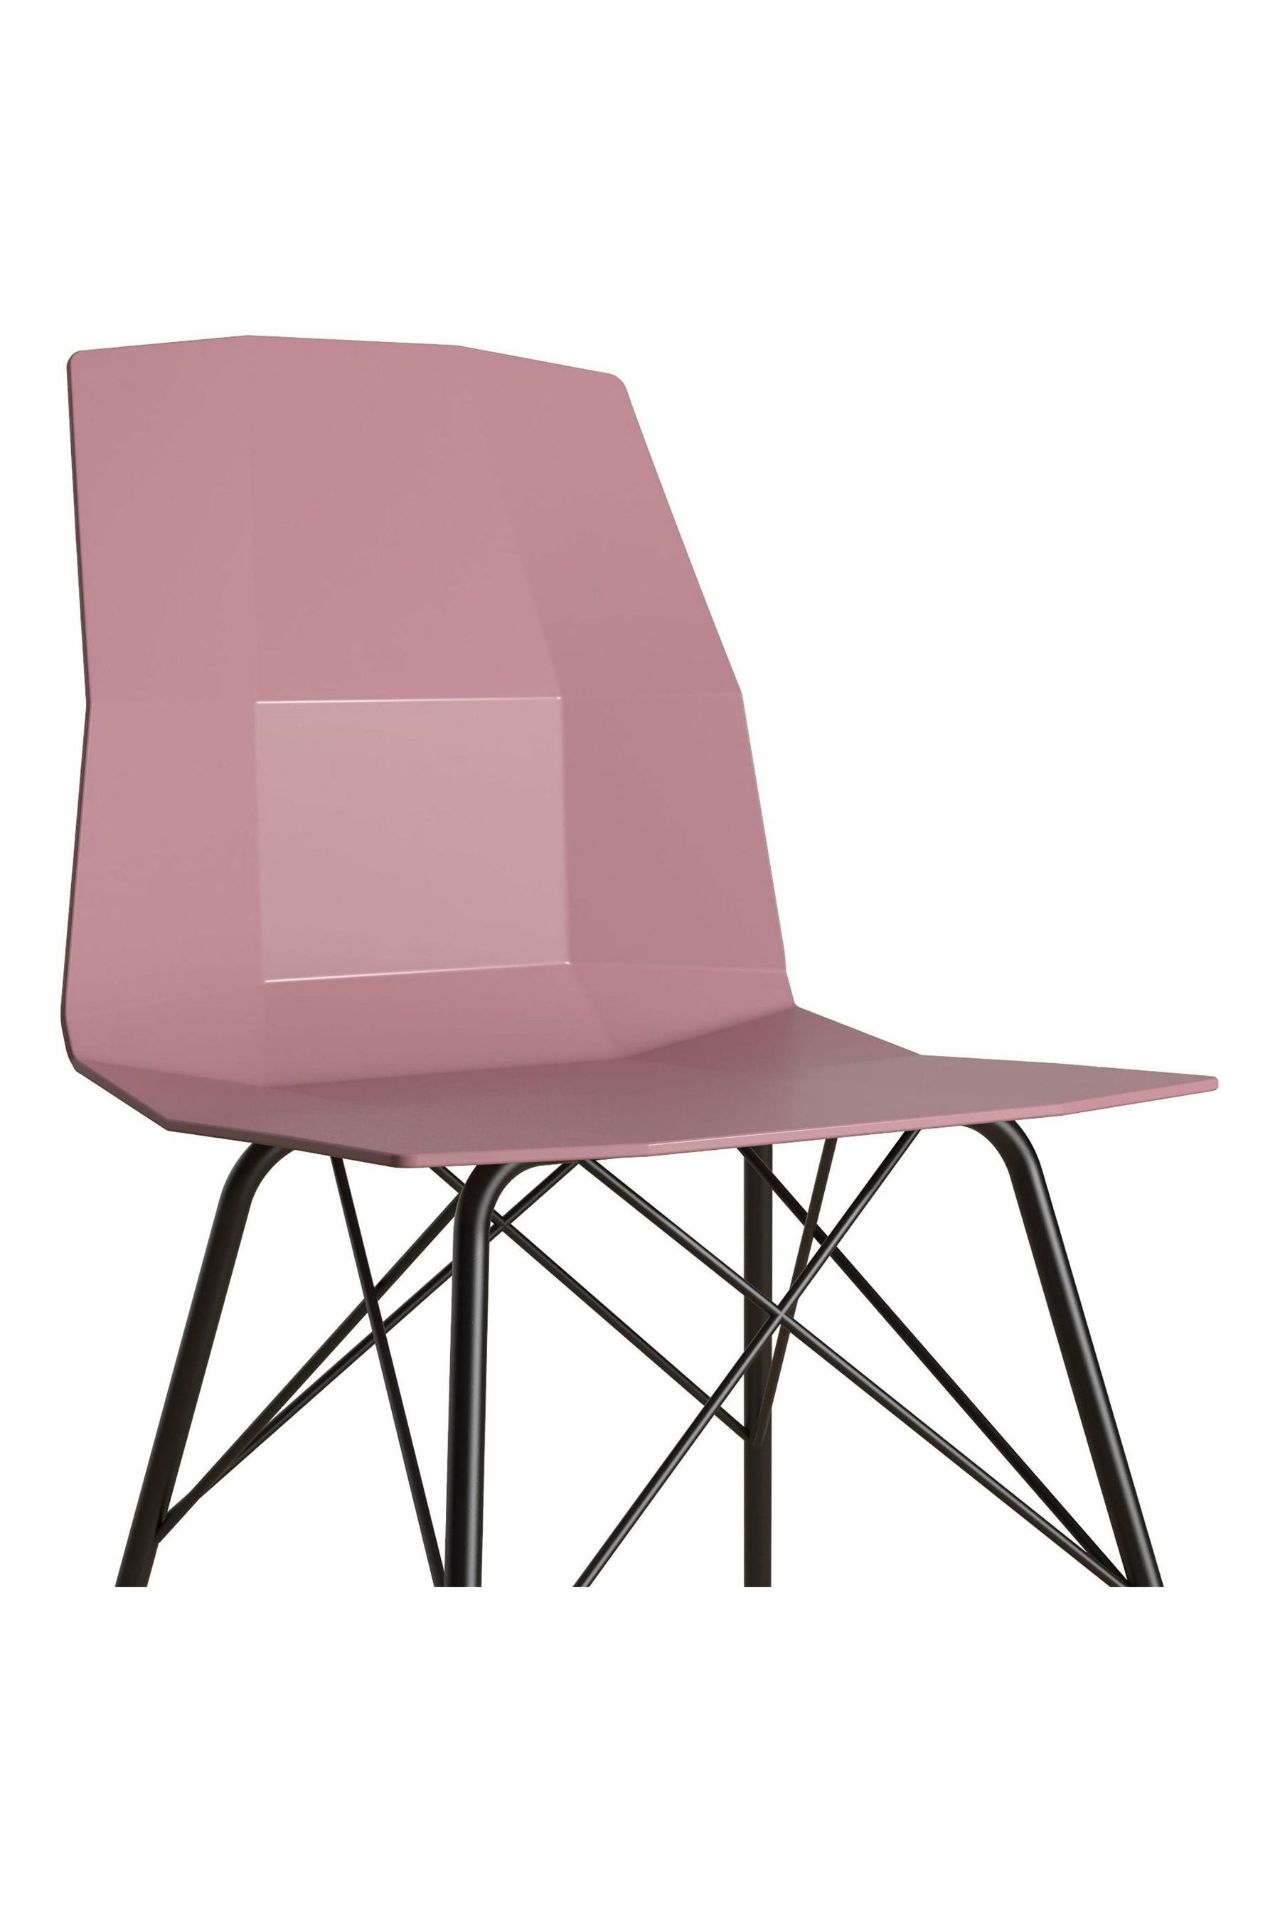 Brand New Pink CosmoLiving Riley Dining Chair, Who needs ordinary when your home décor can be